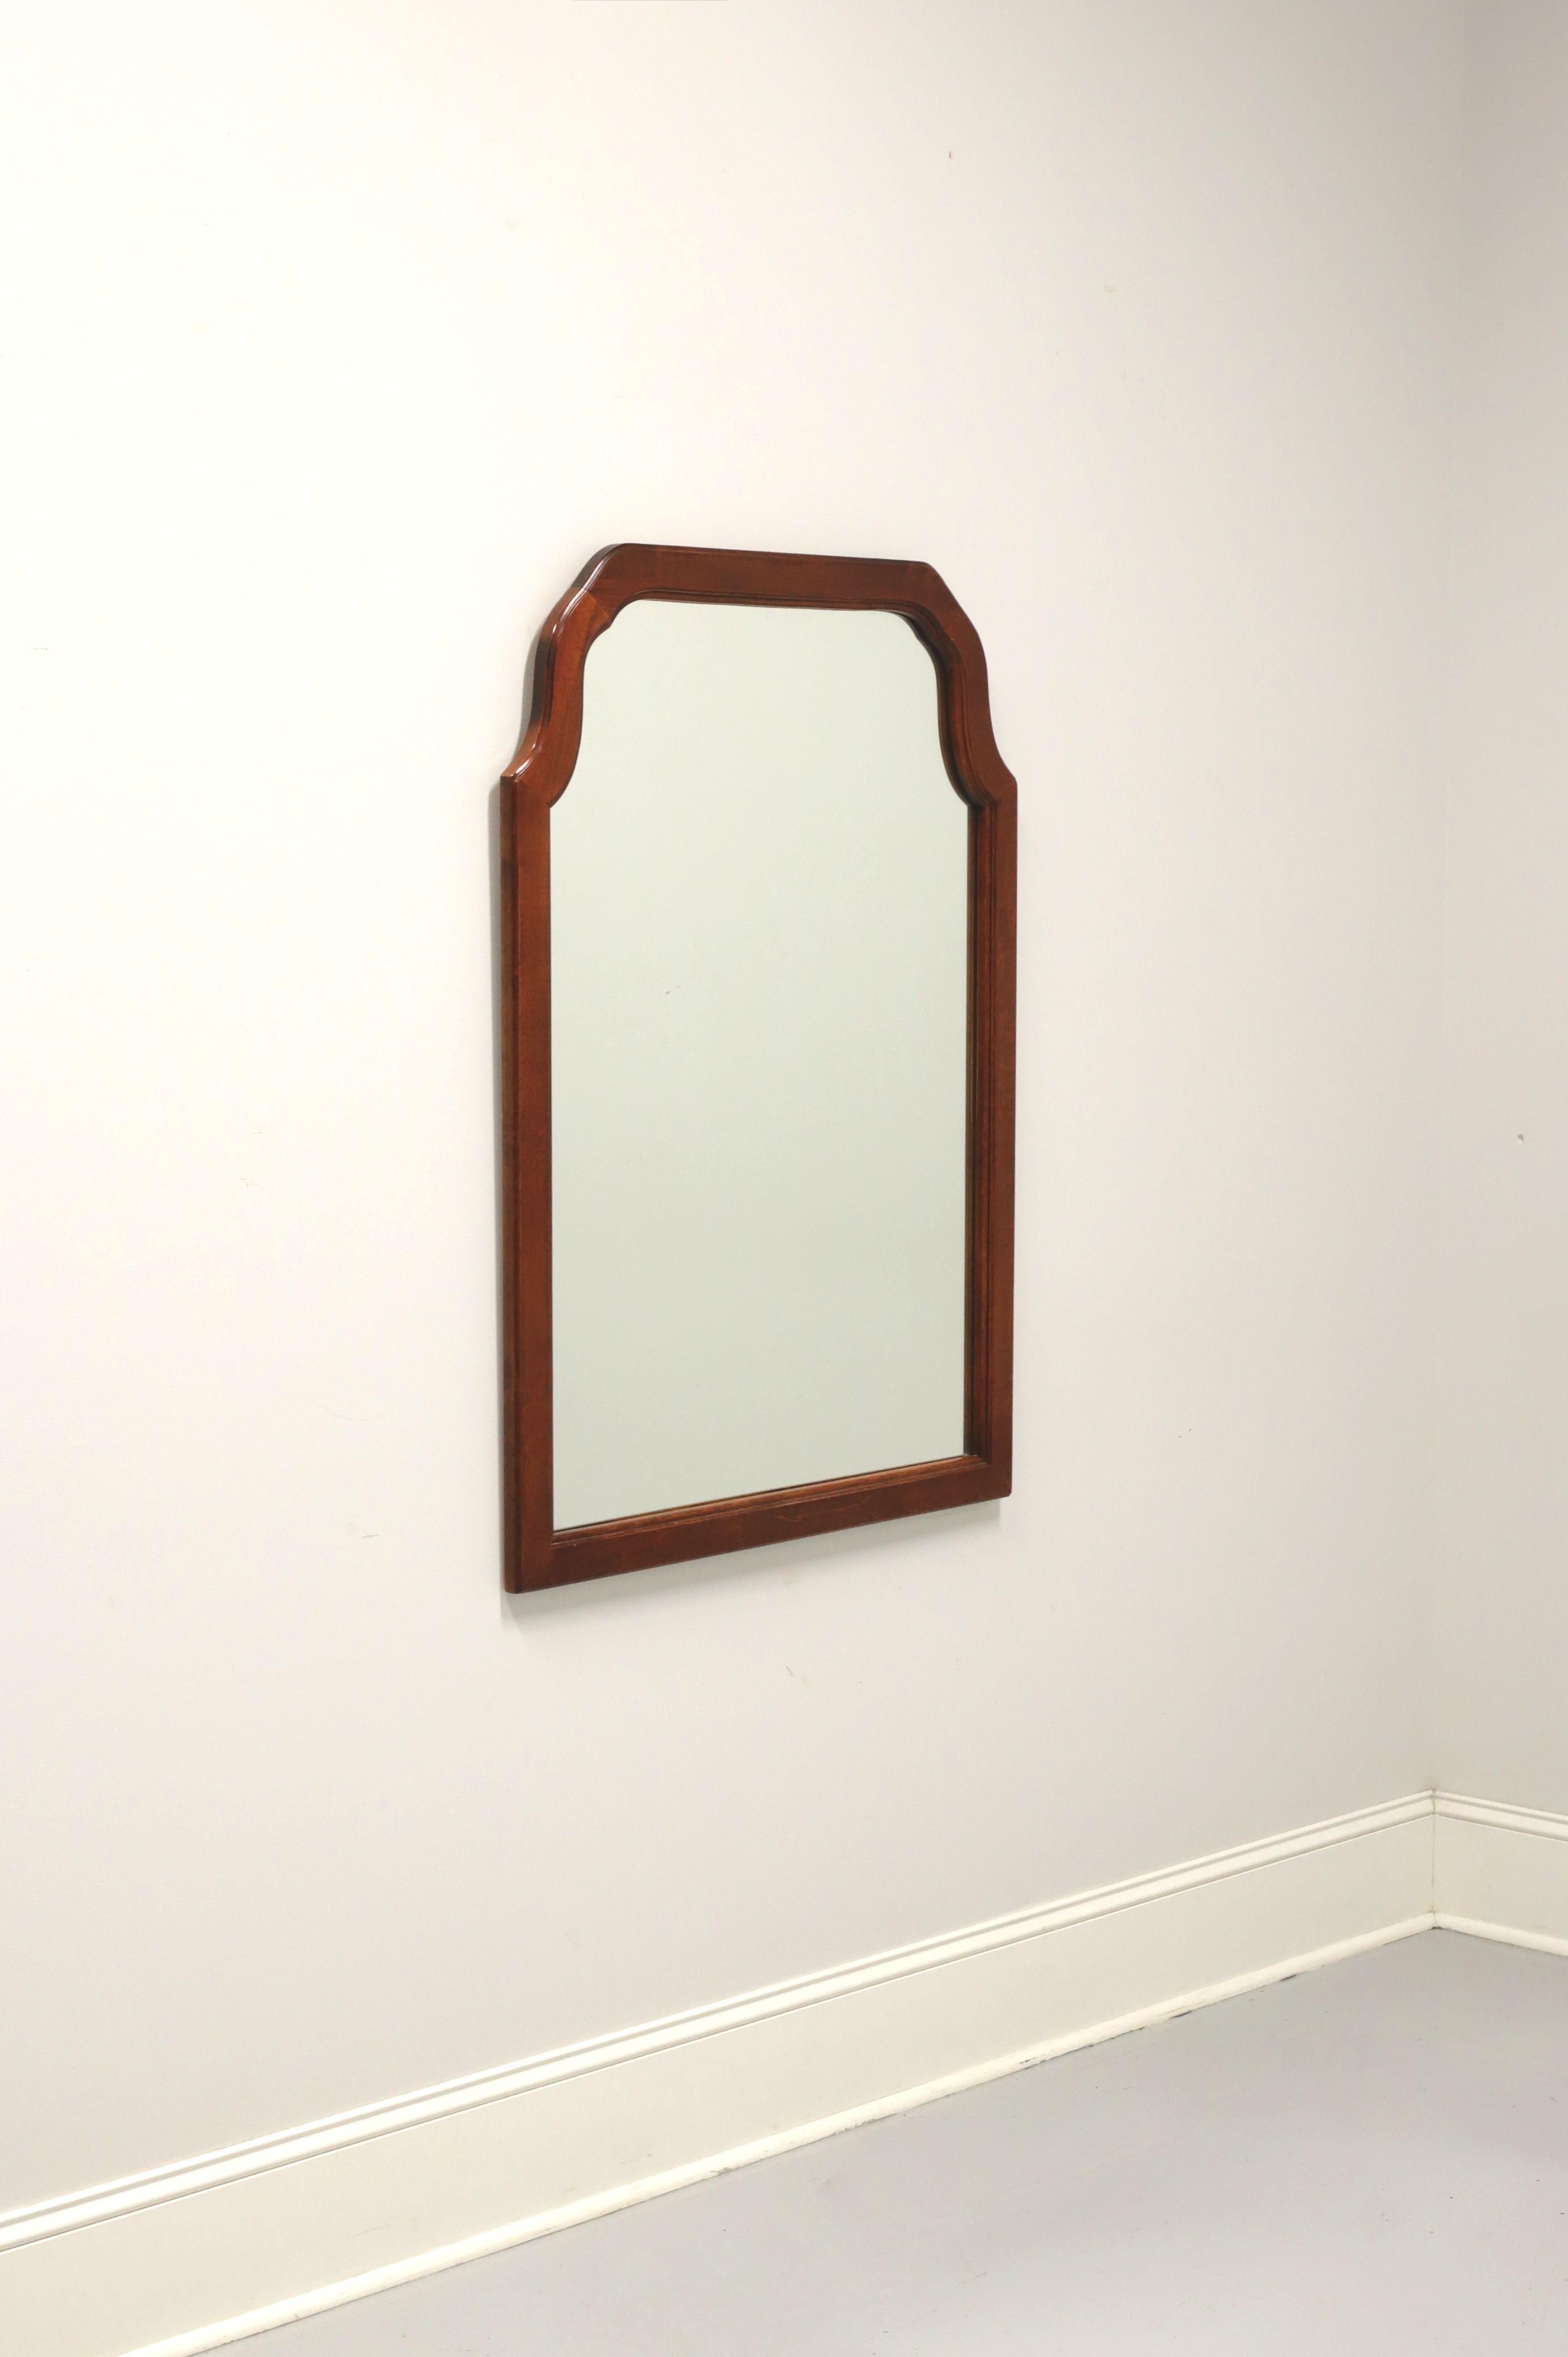 A Traditional style wall mirror, unbranded, similar quality to Craftique or Henredon. Mirror glass and cherry frame with flat arched top. Made in the USA, in the mid 20th century.

Measures: 31.5 W 1 D 43.5 H, Weighs approximately: 35